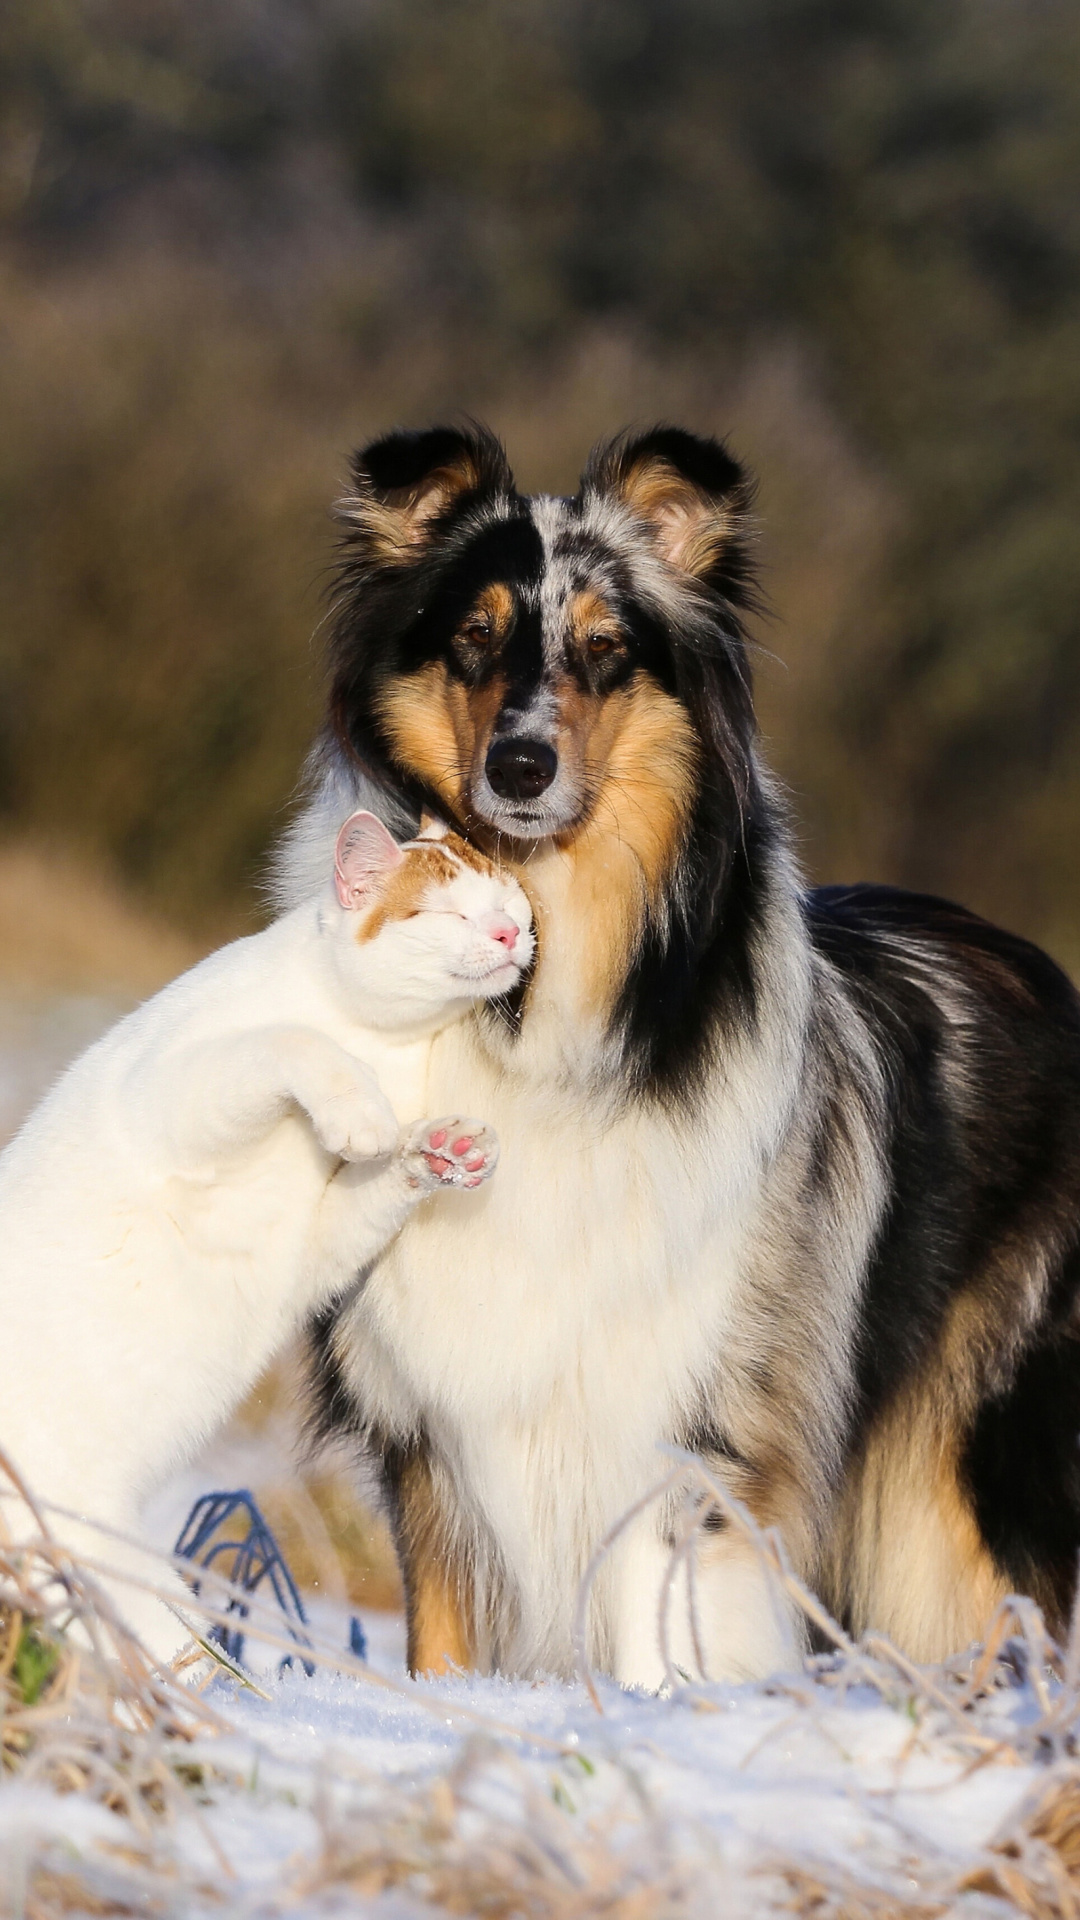 Friendship Cat and Dog Collie wallpaper 1080x1920